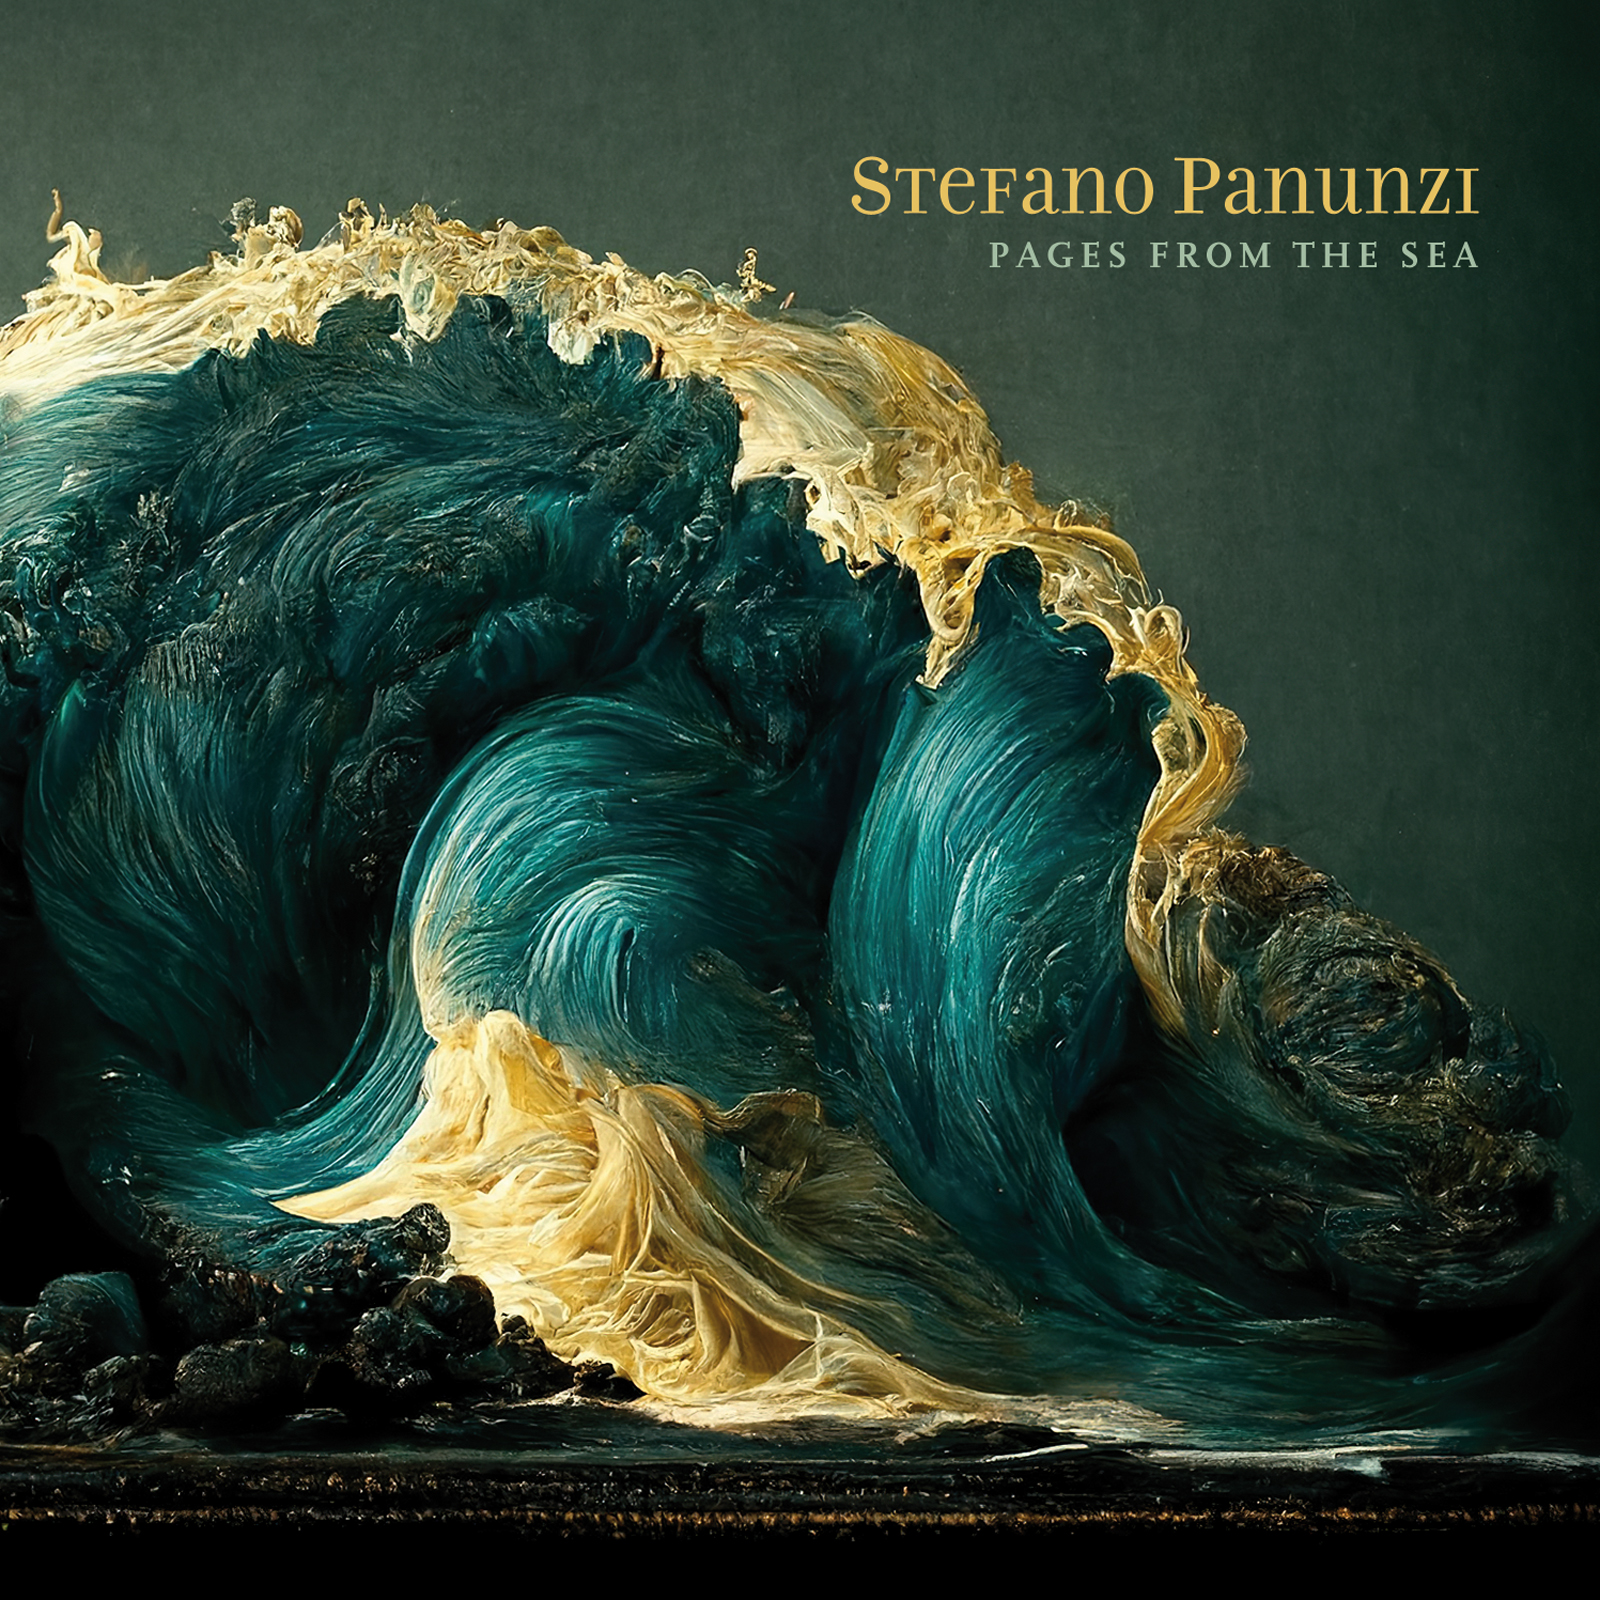 STEFANO PANUNZI – Pages from the Sea